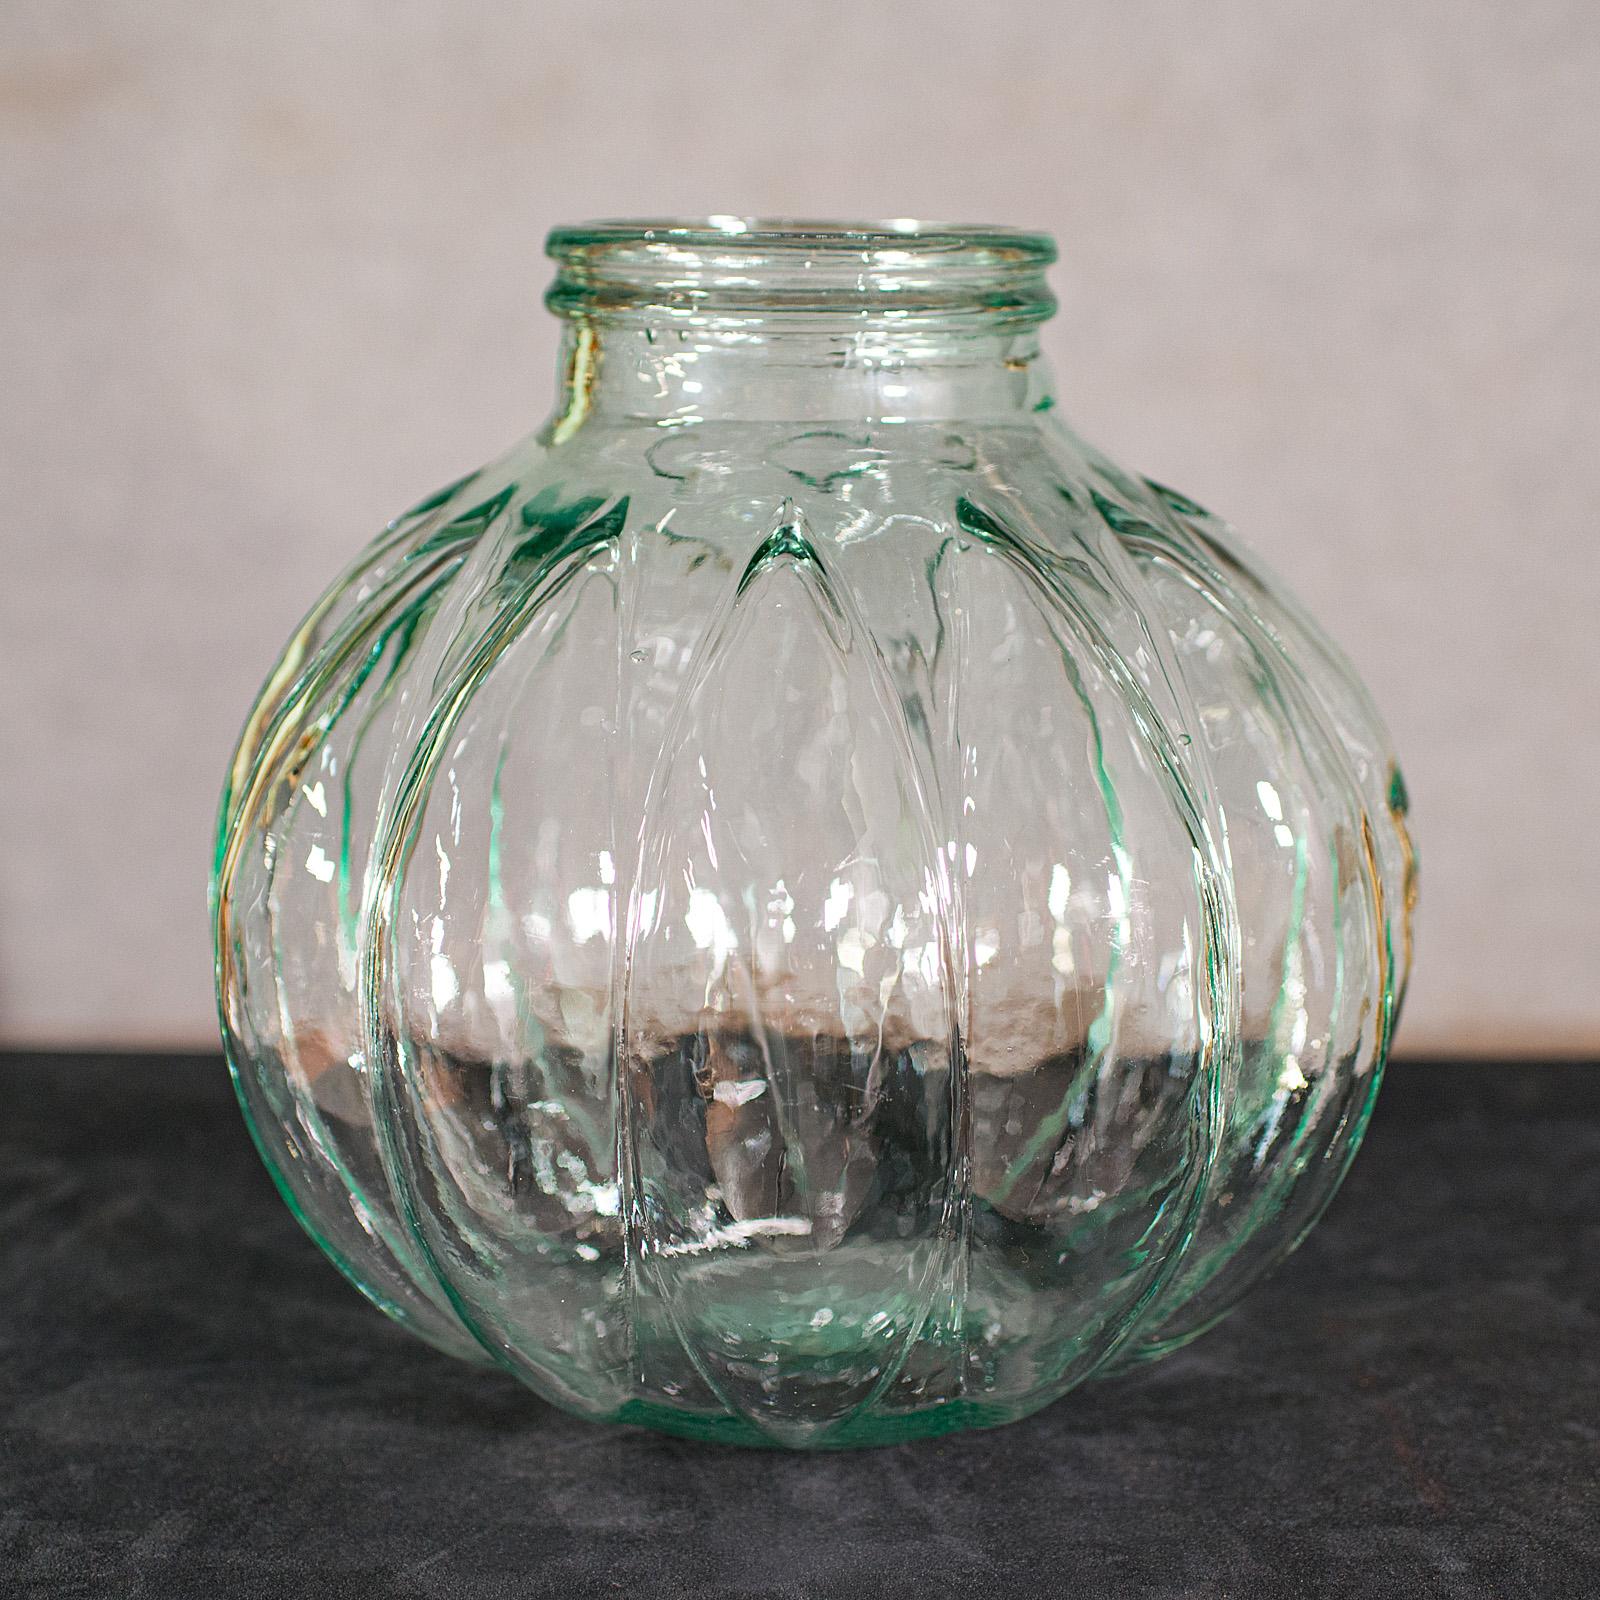 This is a large vintage carboy. An English, decorative glass storage jar, dating to the late 20th century, circa 1970.

Generously sized, with distinctive 'garlic clove' form
Displays a desirable aged patina throughout
Lightly green tinted glass